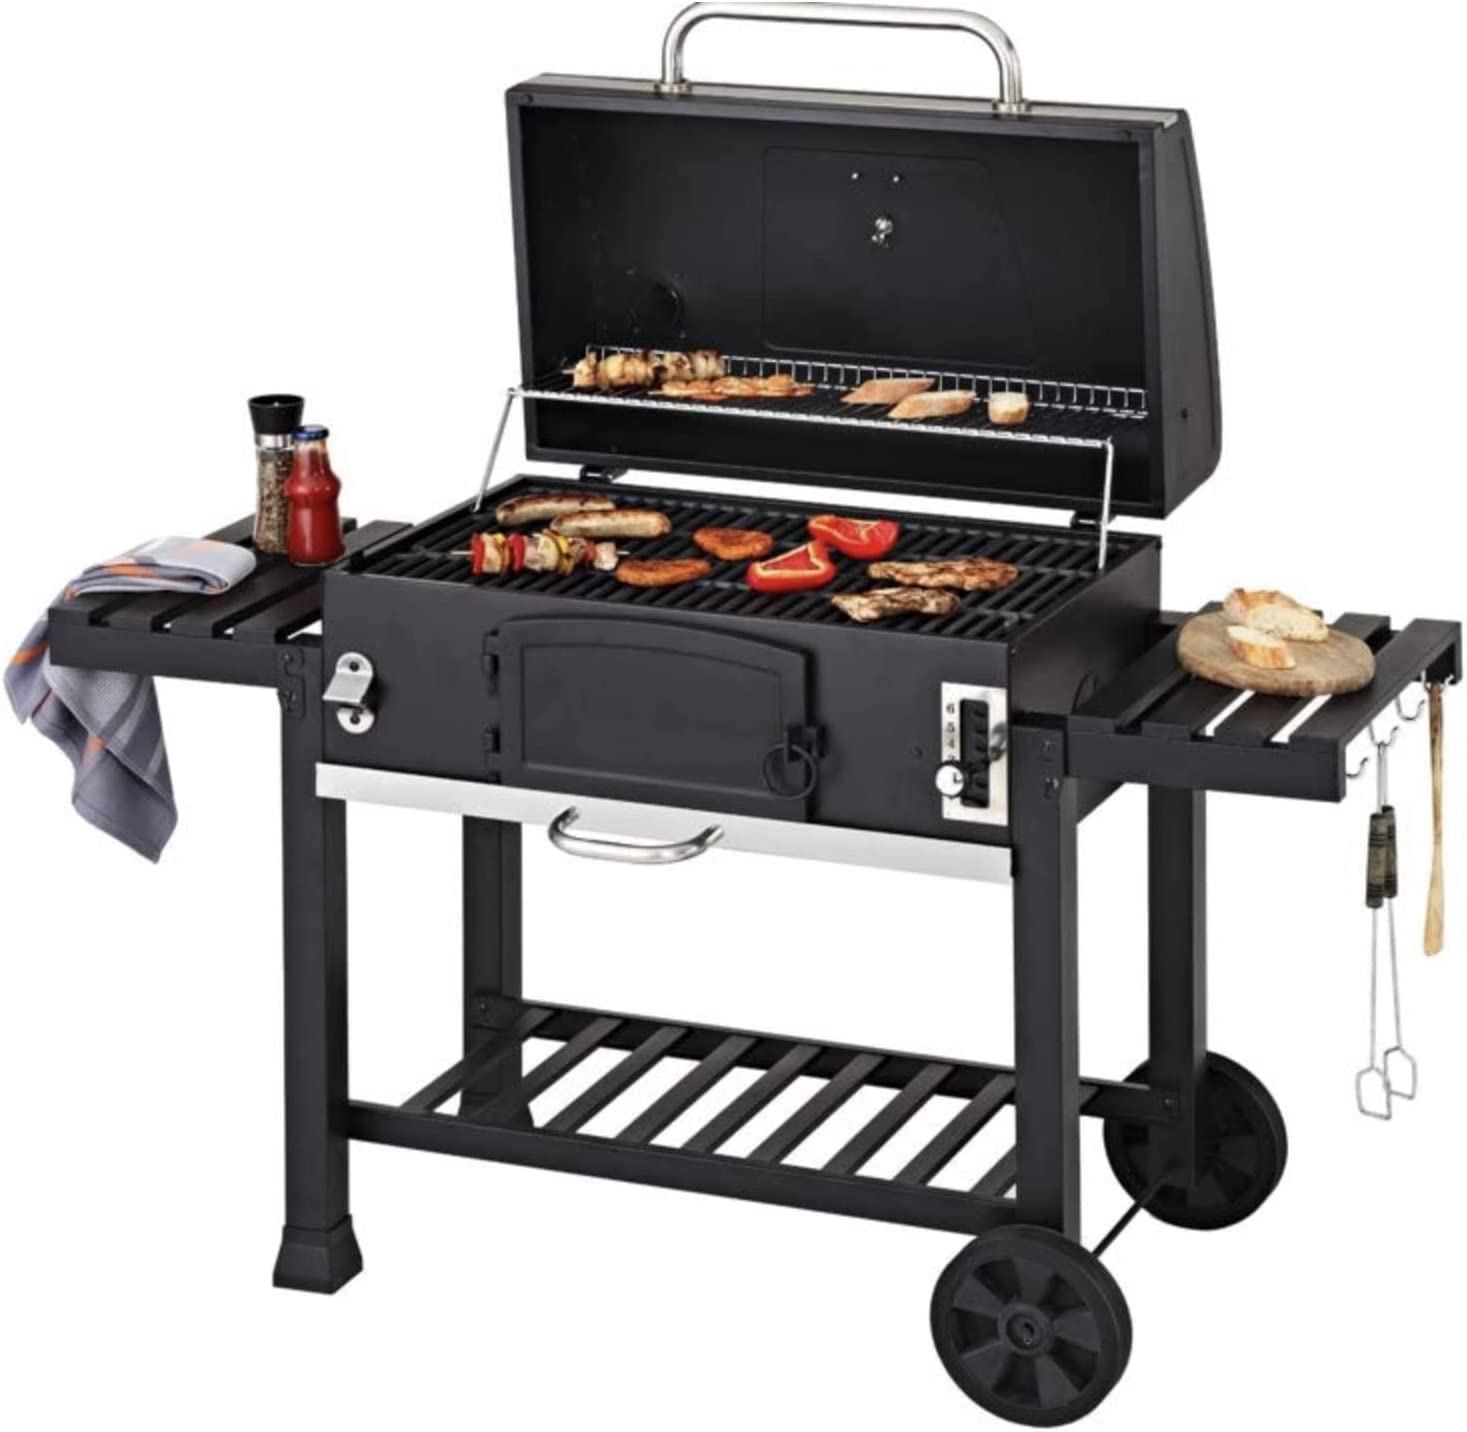 CosmoGrill Outdoor -Best Barbecue Smoker